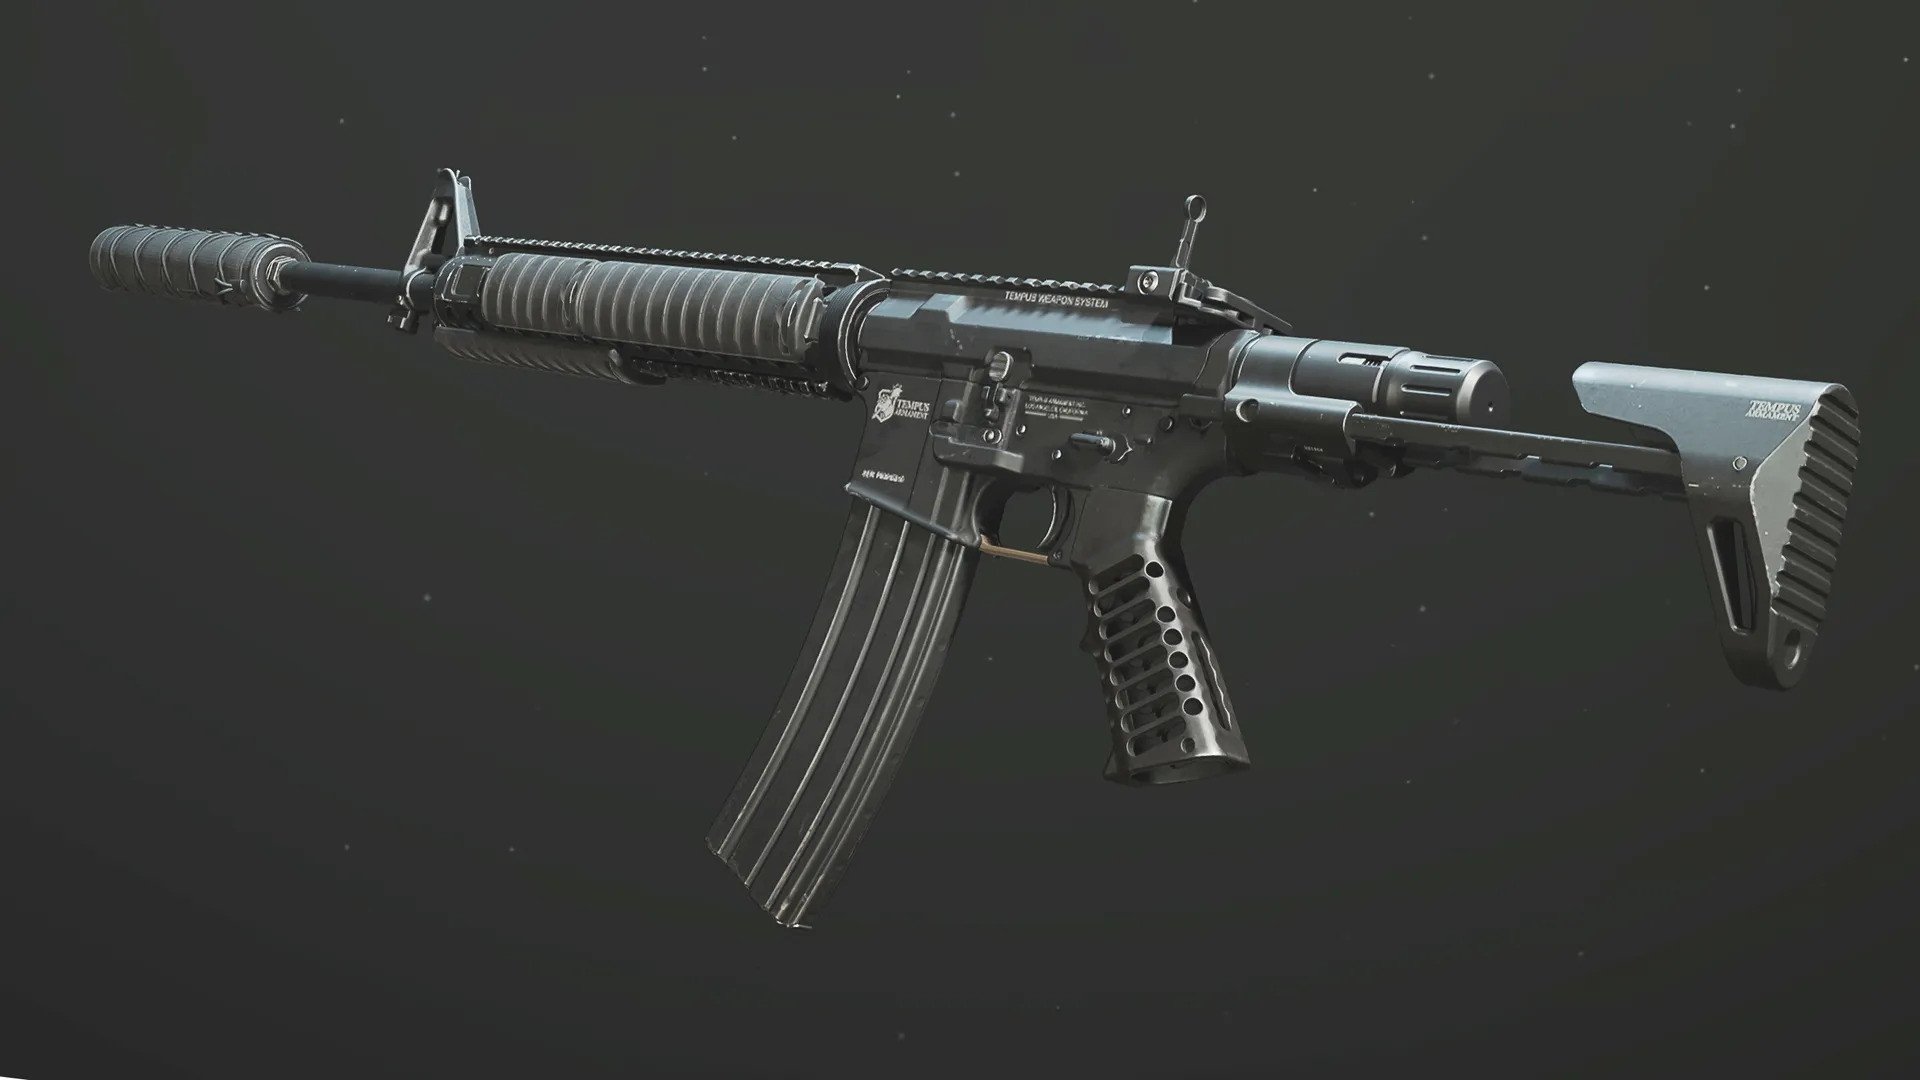 Escape From Tarkov: Top Ten Weapons Ranked